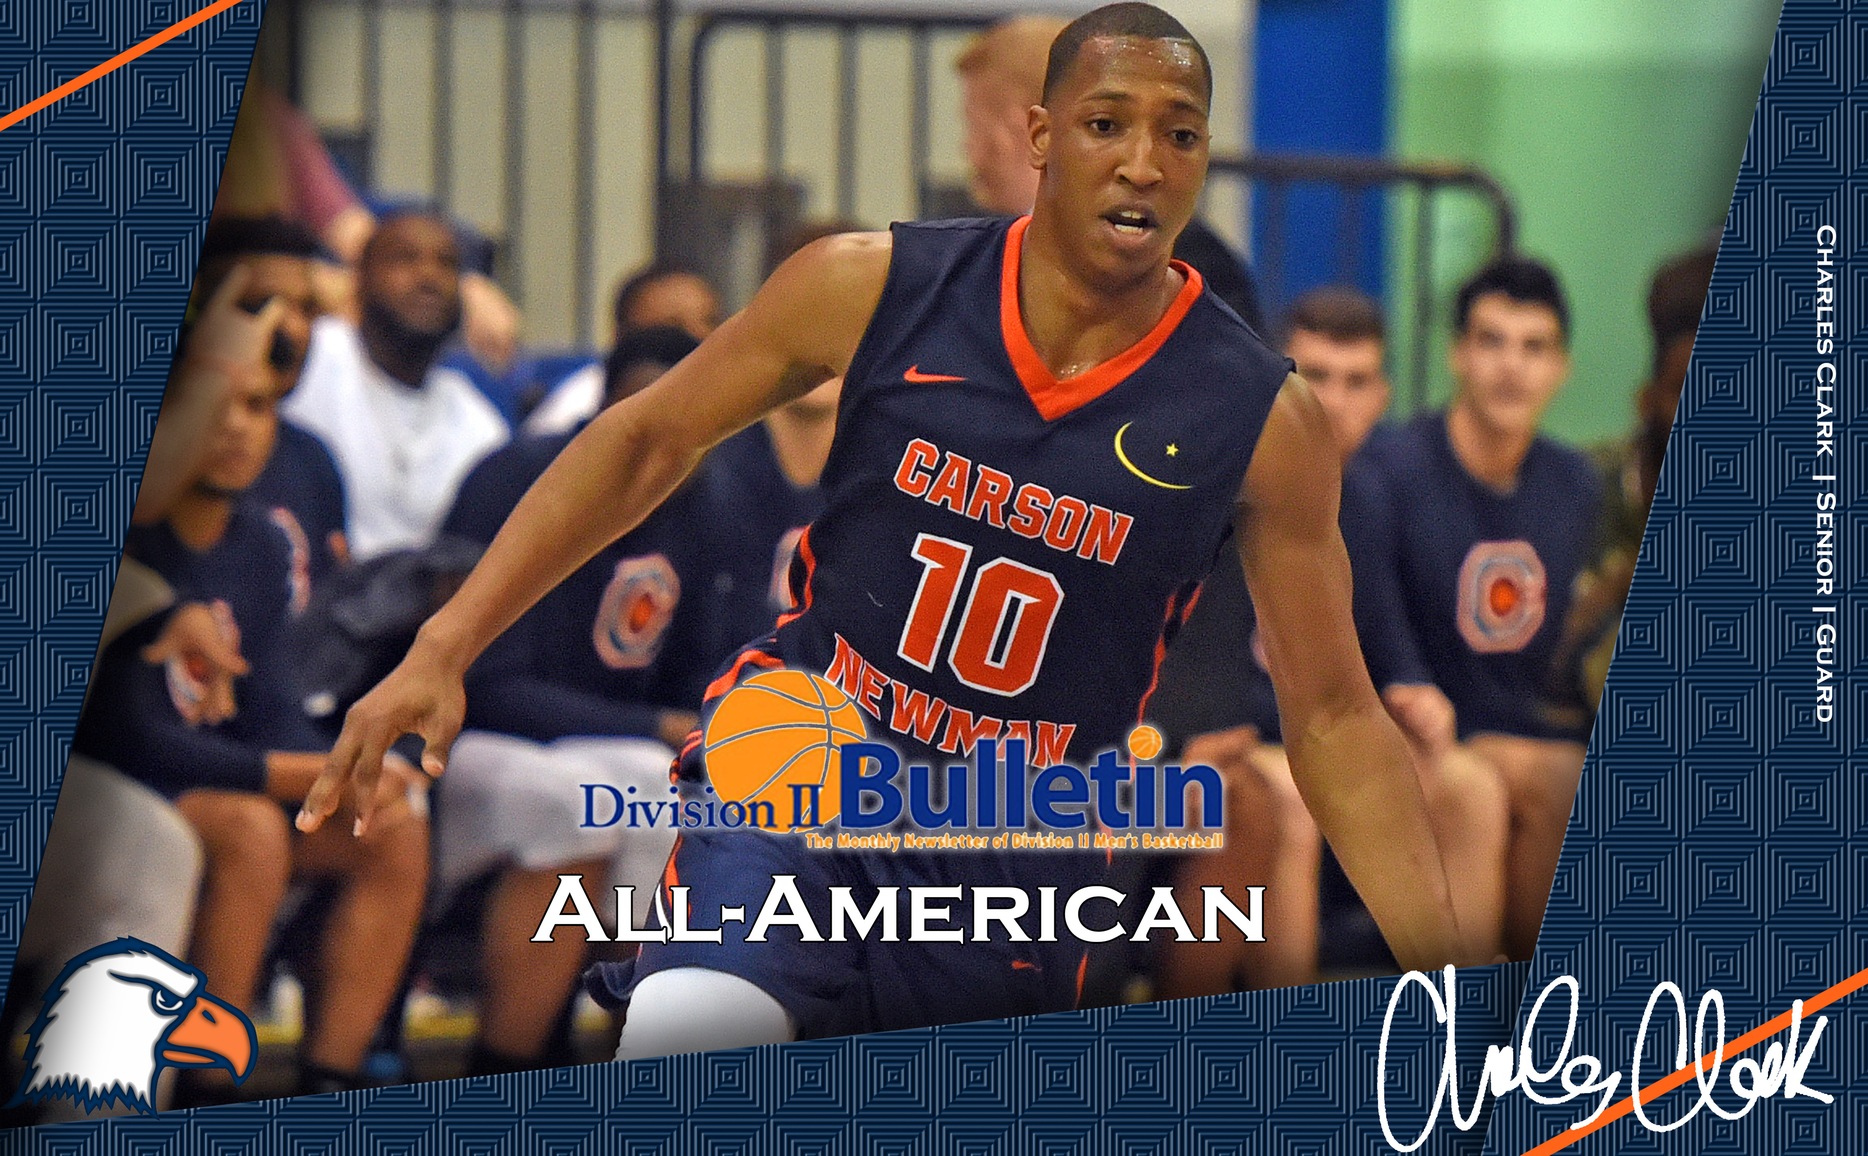 Clark gathers All-America honors from Division II Bulletin, becomes program's second two-time All-American